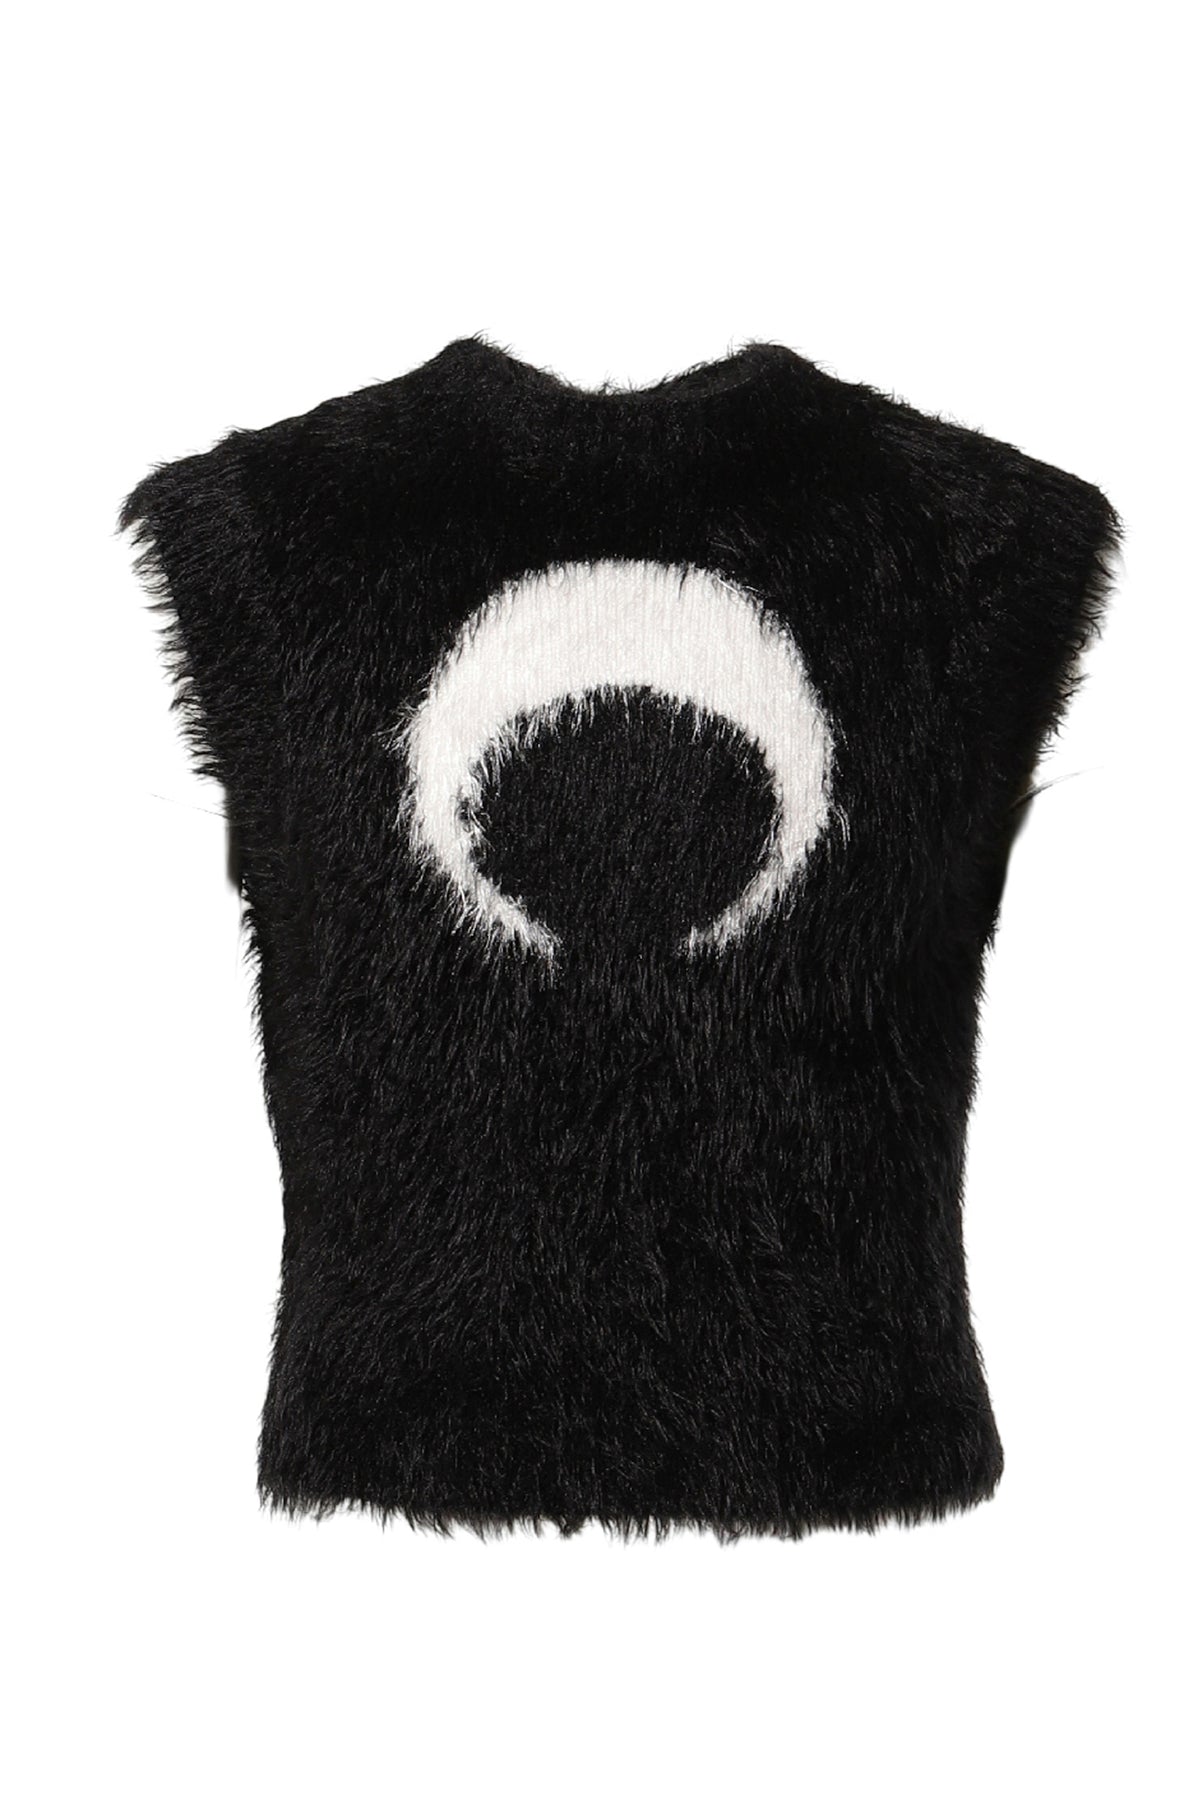 WILD PUFFY KNIT SLEEVELESS PULLOVER / BLK